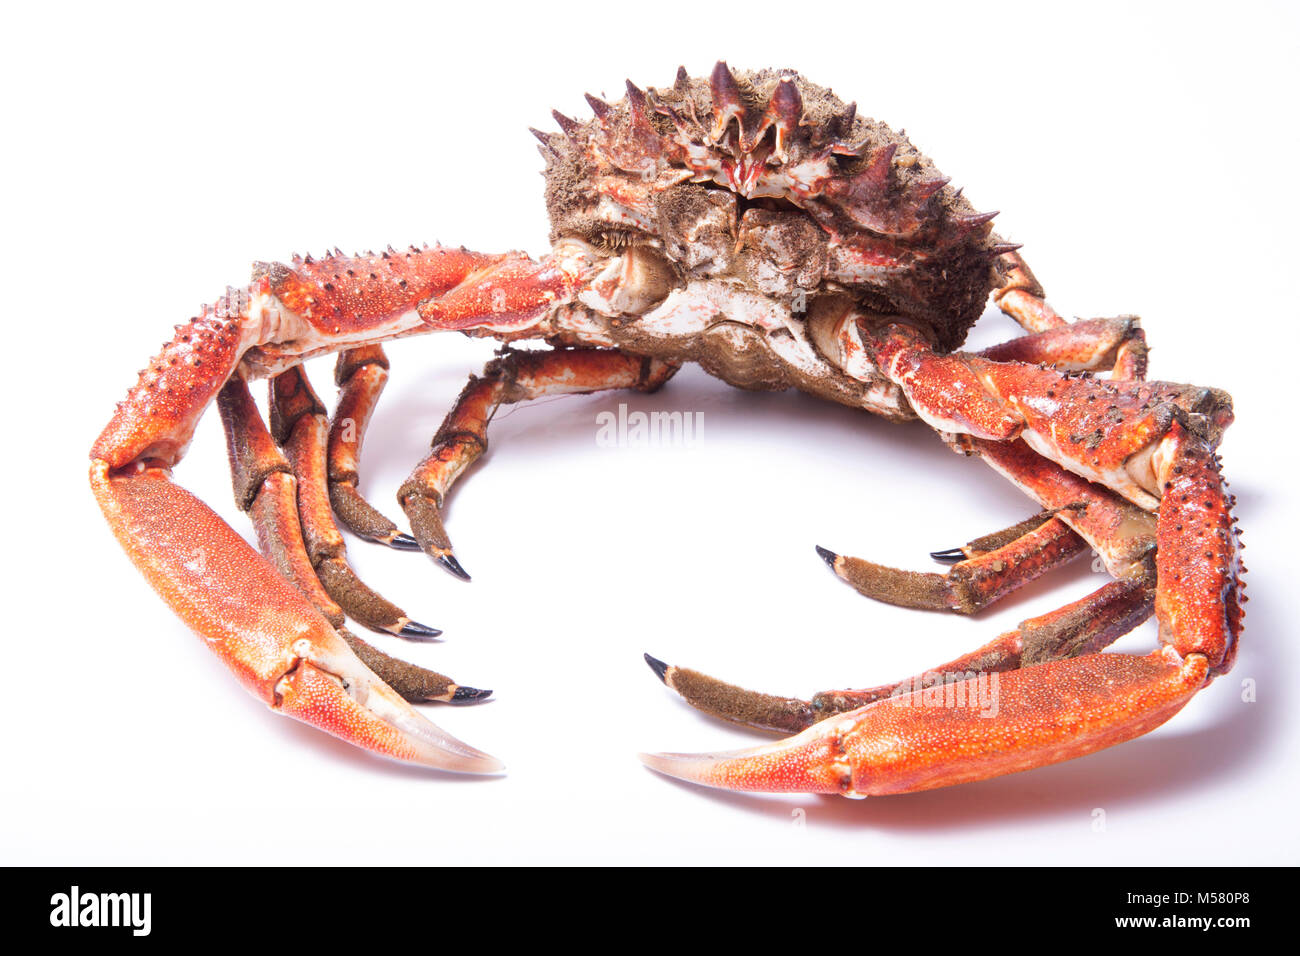 A raw, uncooked male Spider crab, Maja squinado, caught in Dorset England UK GB using a drop net fished from a pier. White background. Stock Photo